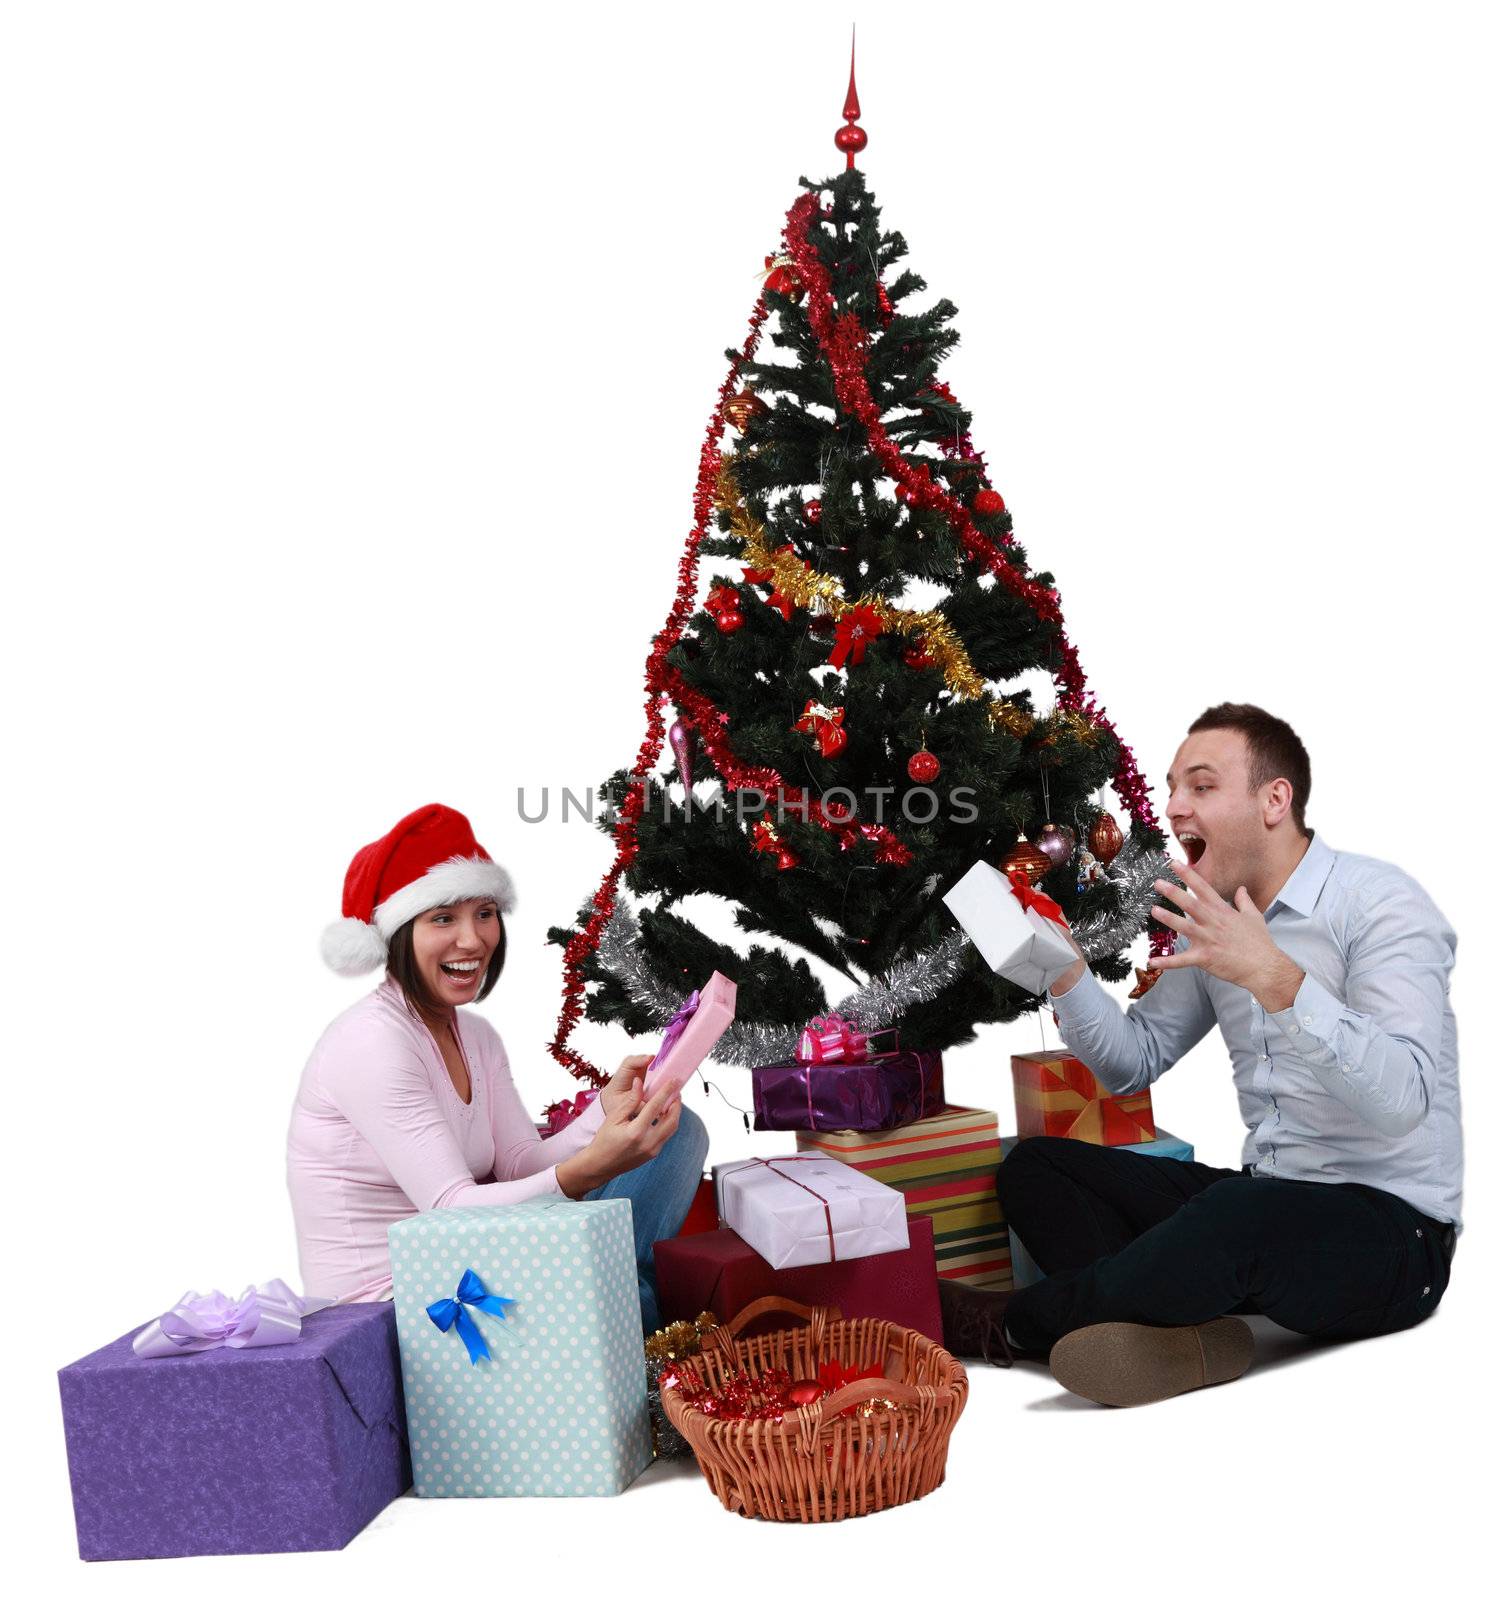 Studio shot of a young couple enjoying the gifts in front of the Christmas Tree, against a white background.